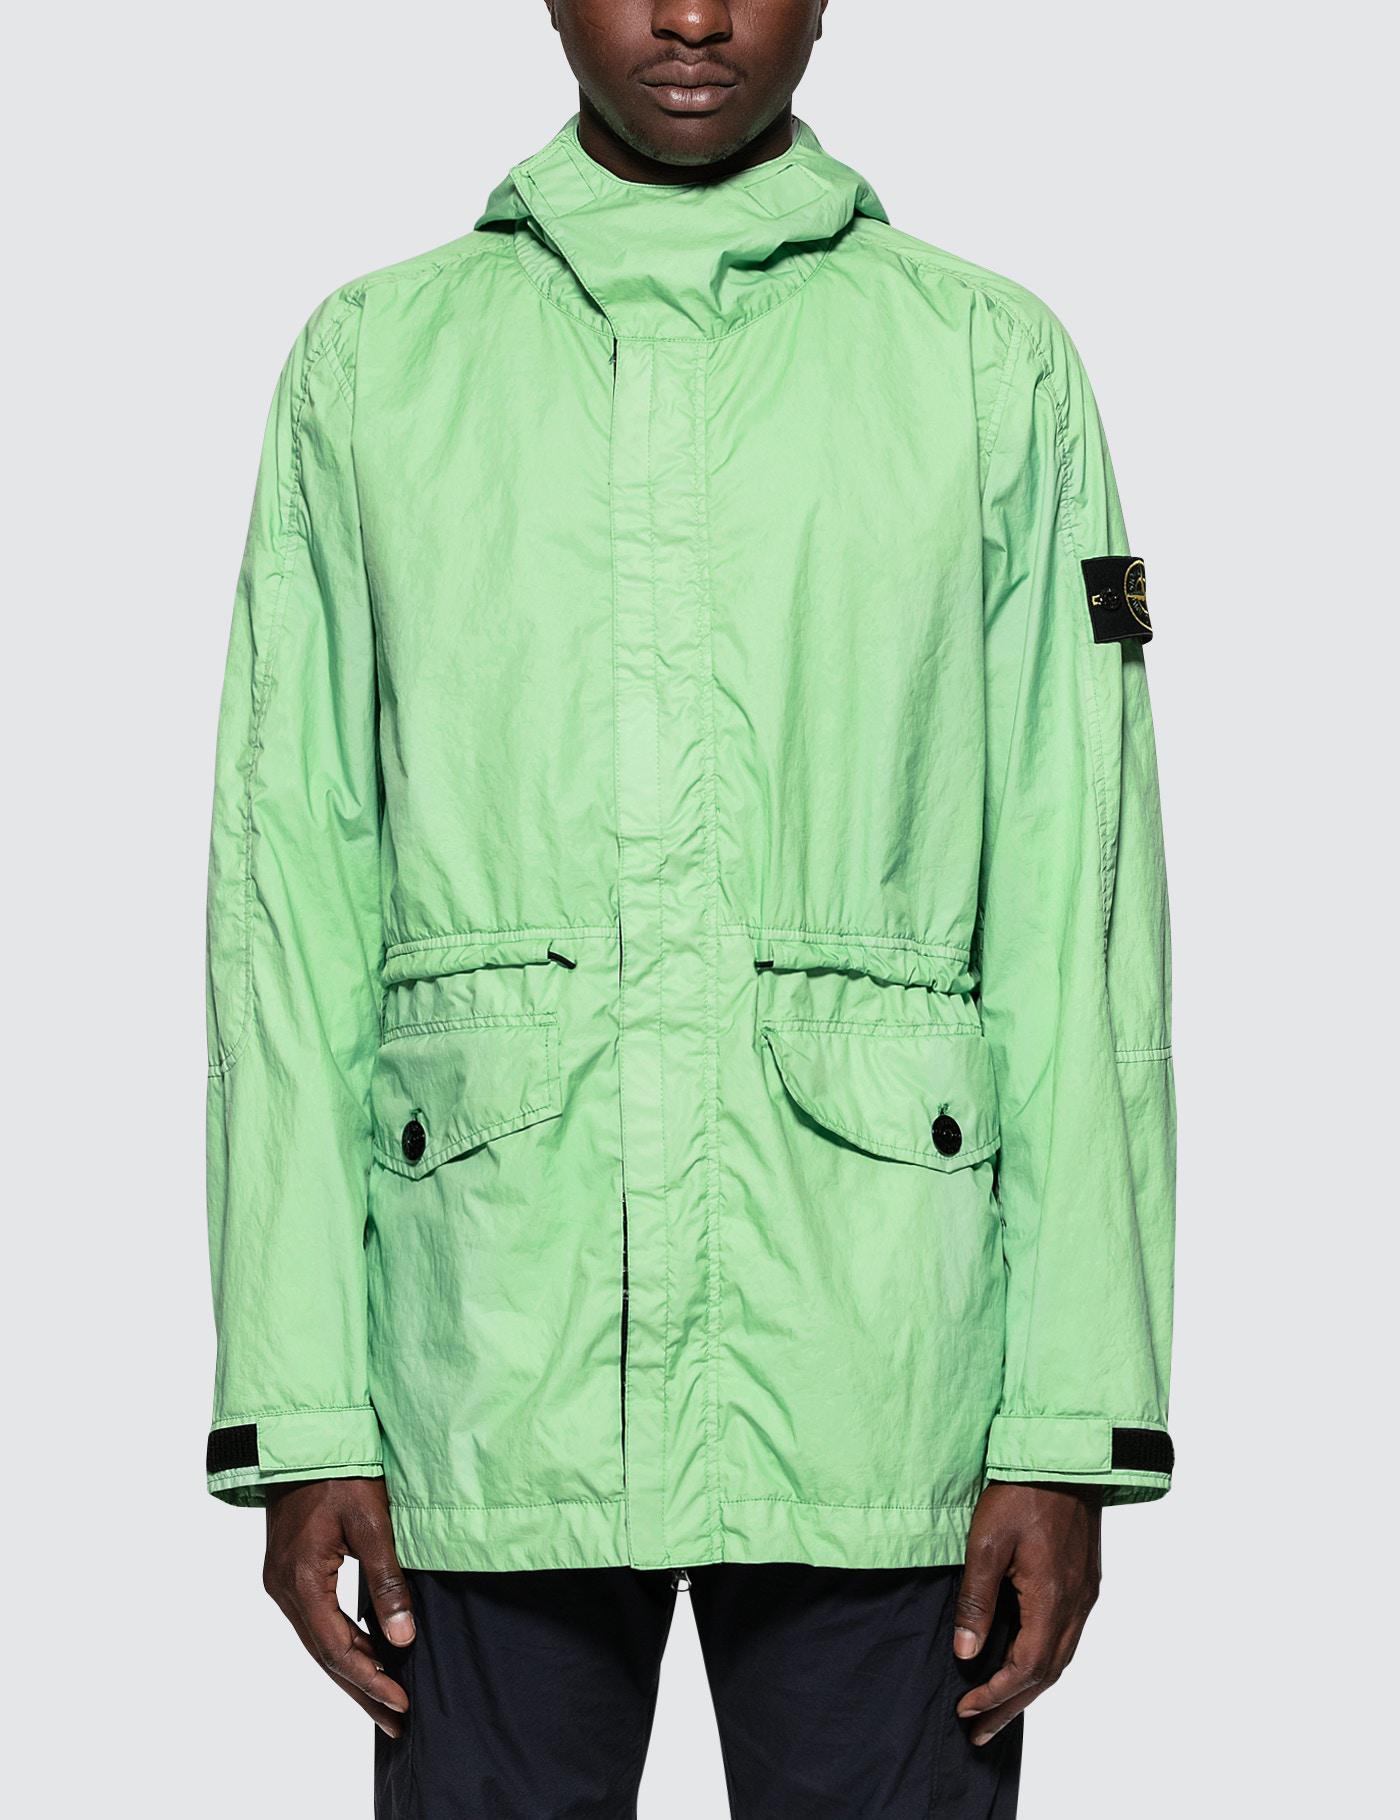 Stone Island Synthetic Membrana Tc Jacket in Green for Men - Lyst